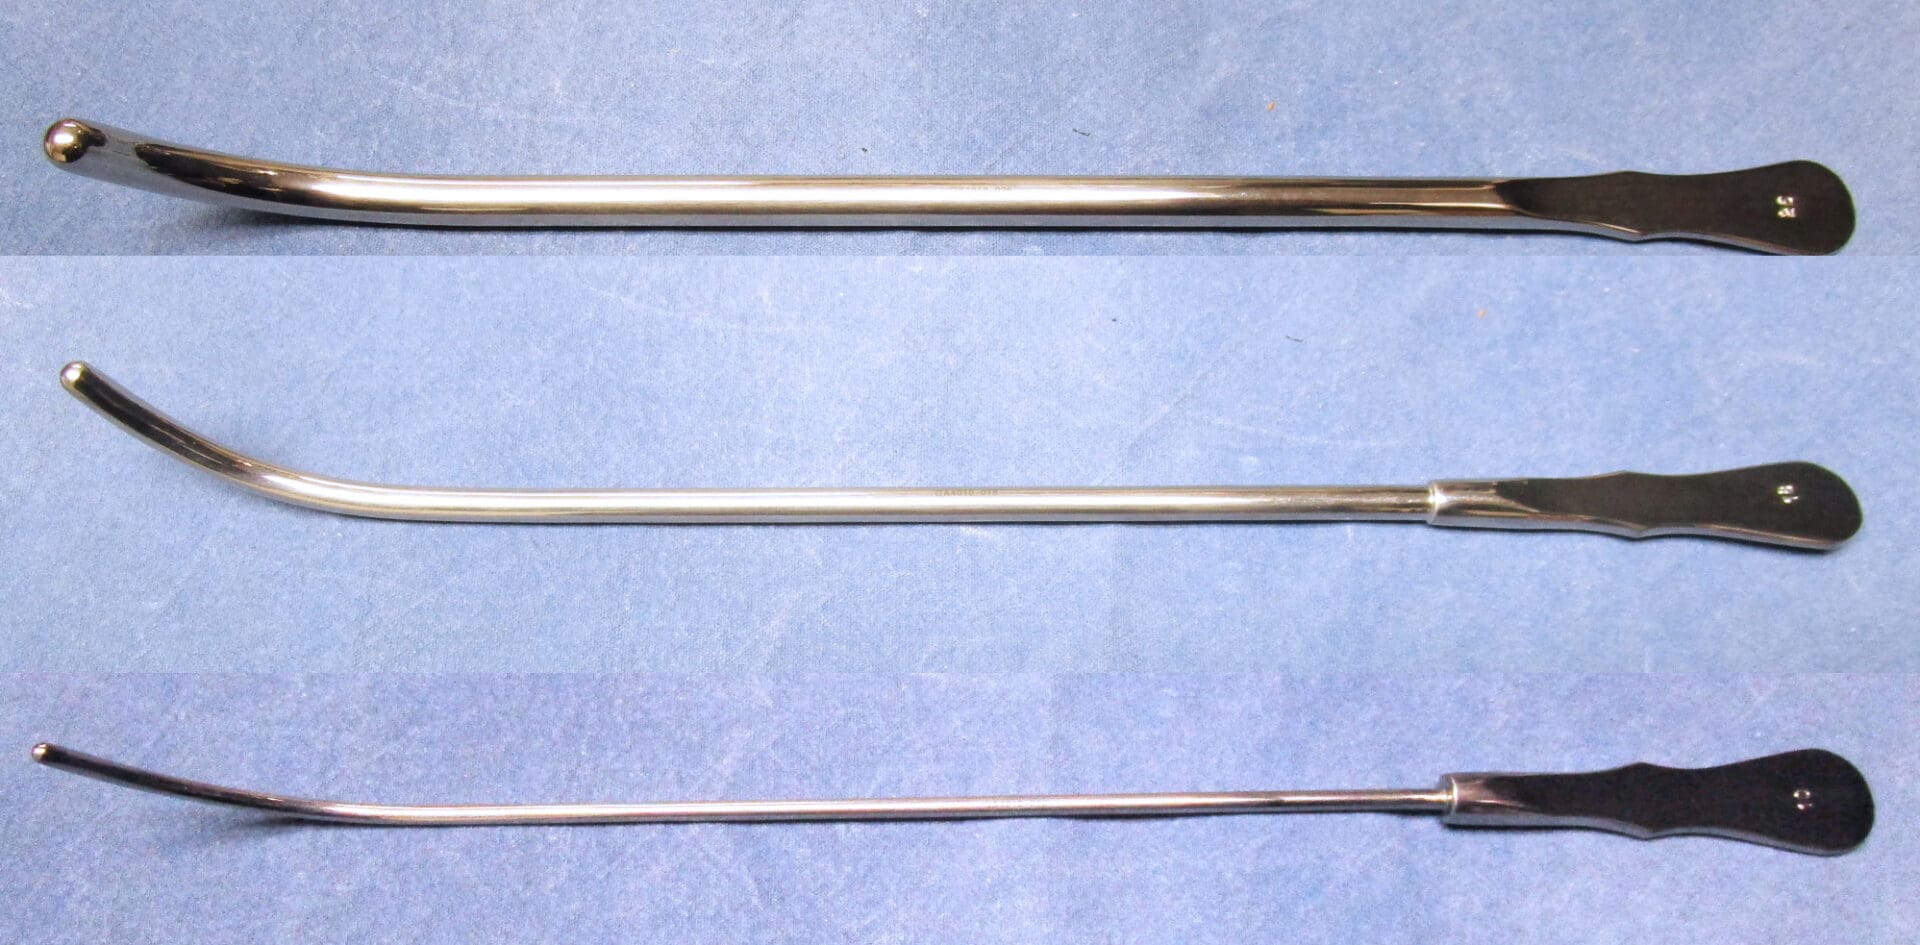 Three different types of surgical tools are shown on a blue background.